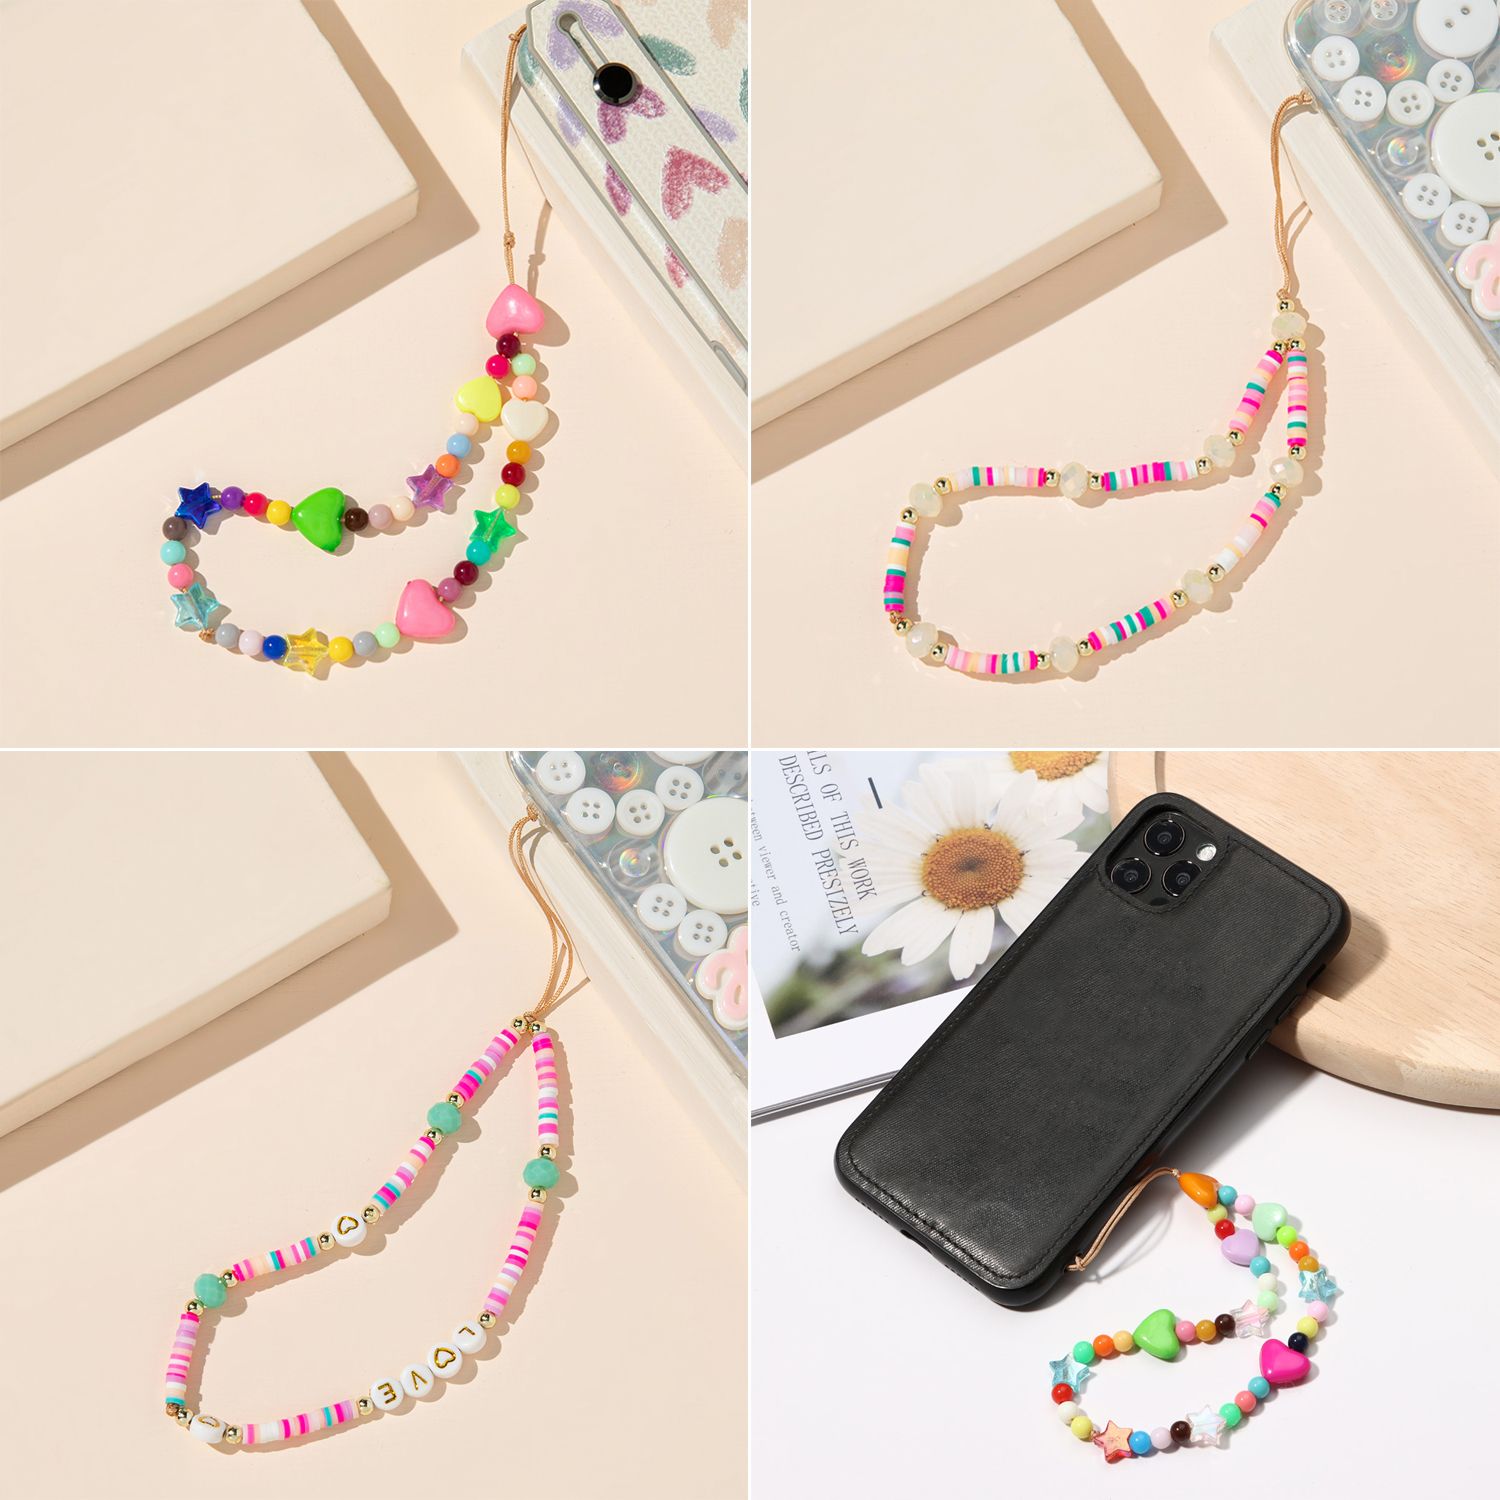 F5OA2UDWC Women Acrylic Bead Simple Colorful Phone Chain Soft Pottery Rope Cell Phone Case Hanging Cord Mobile Phone Strap Lanyard